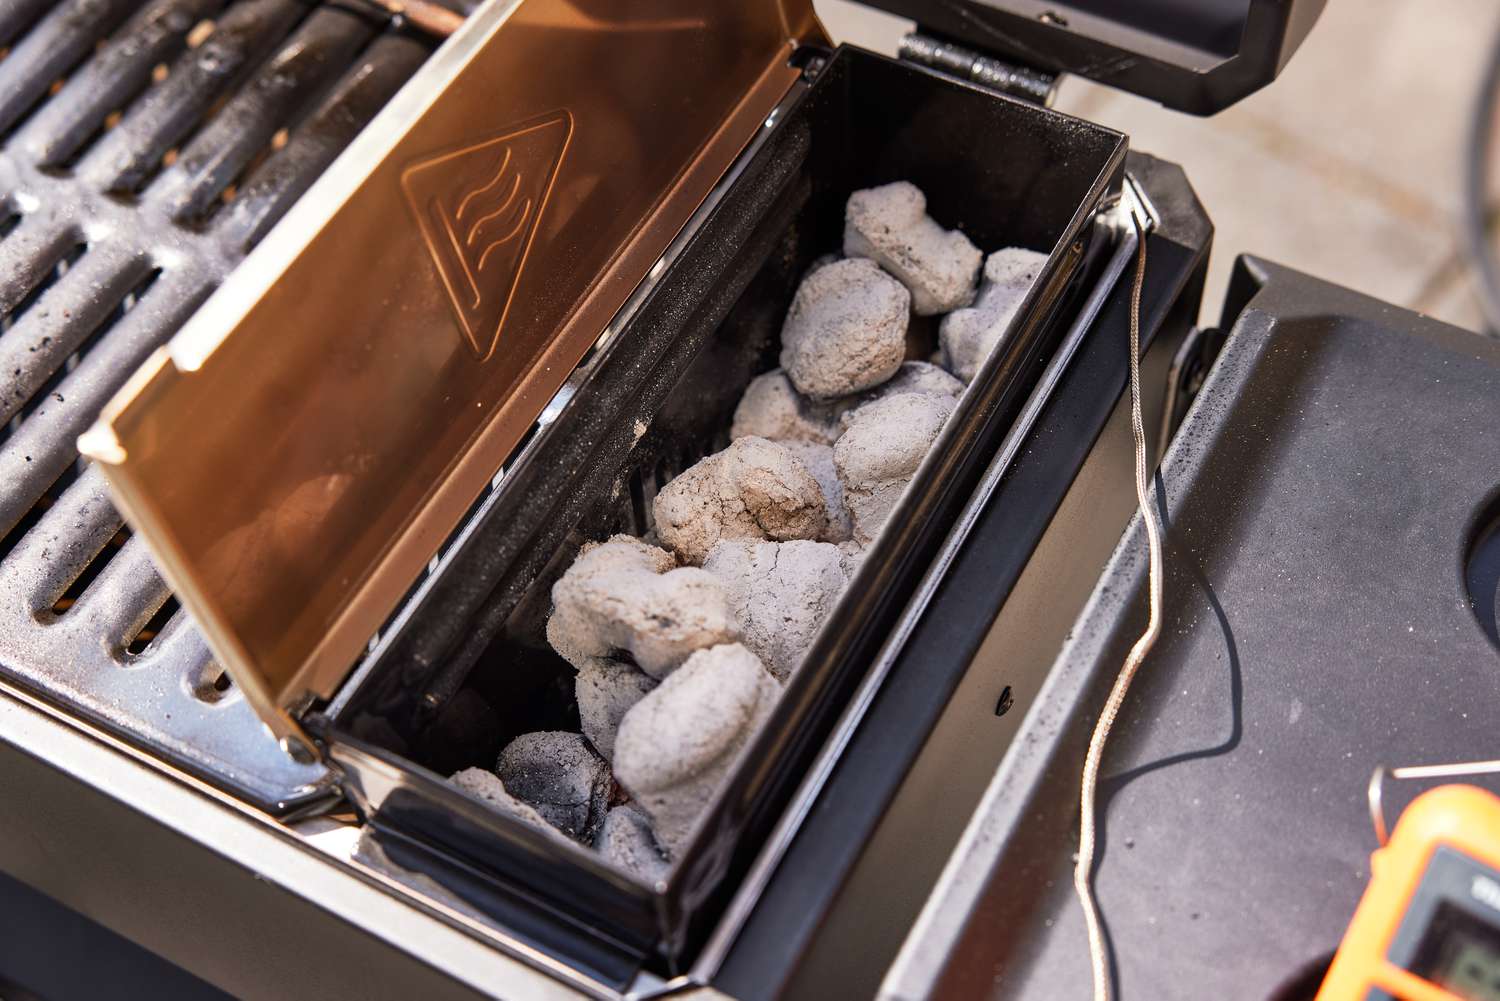 Coal is inside the Masterbuilt Portable Charcoal Grill and Smoker